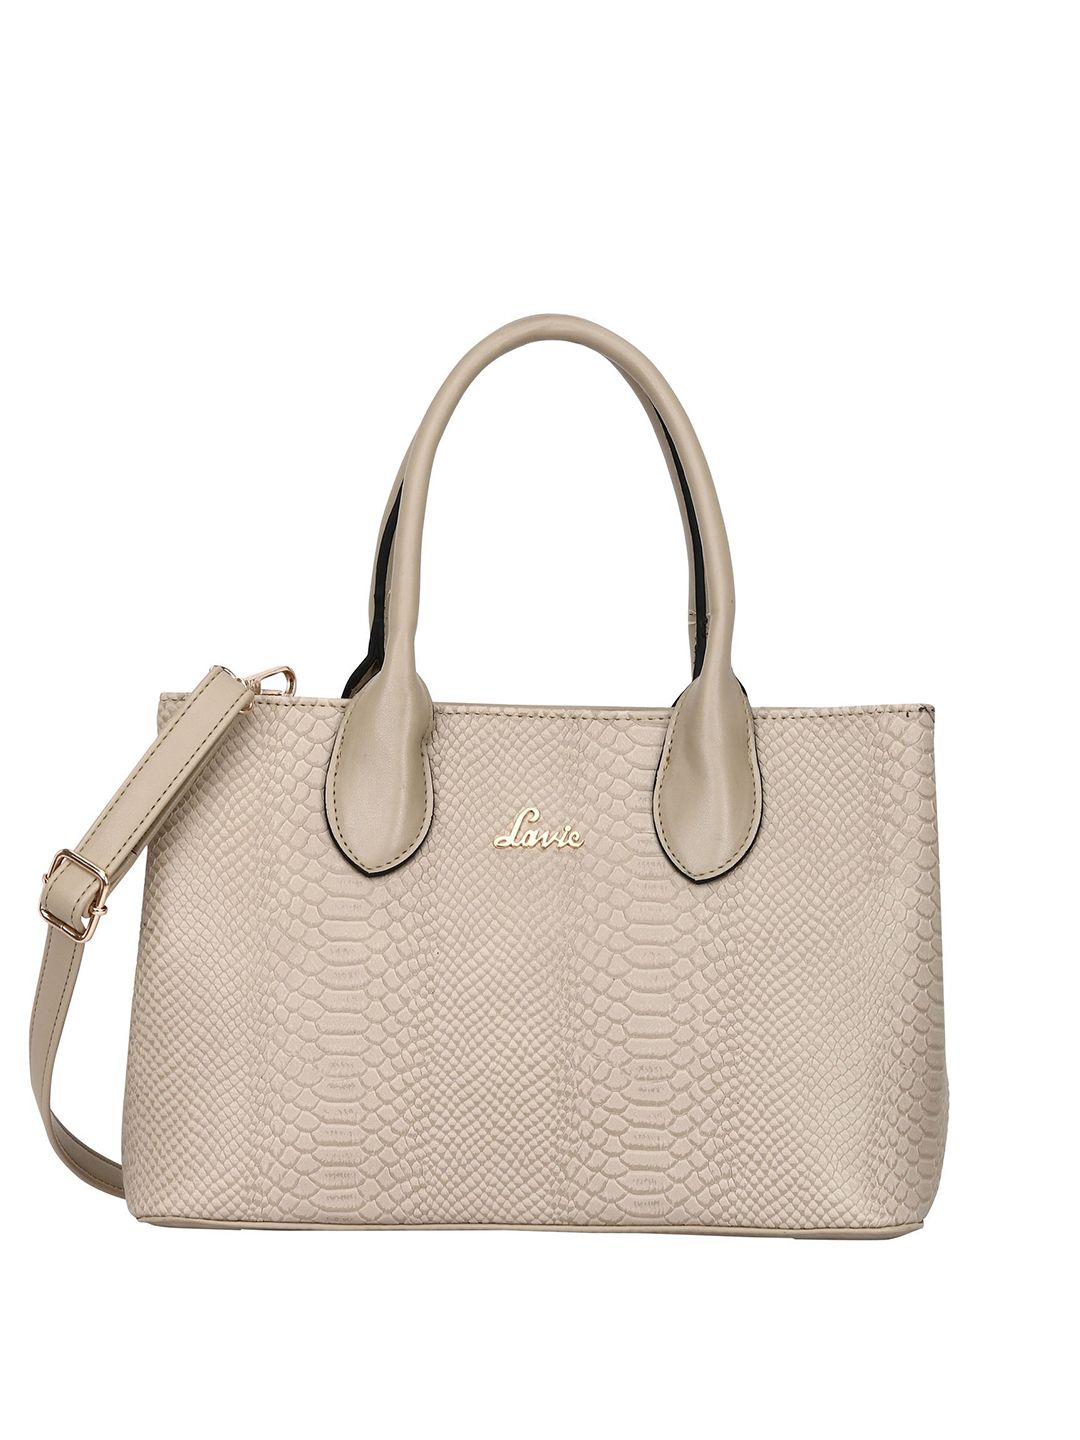 Lavie Beige Textured Handheld Bag with Detachable Sling Strap Price in India